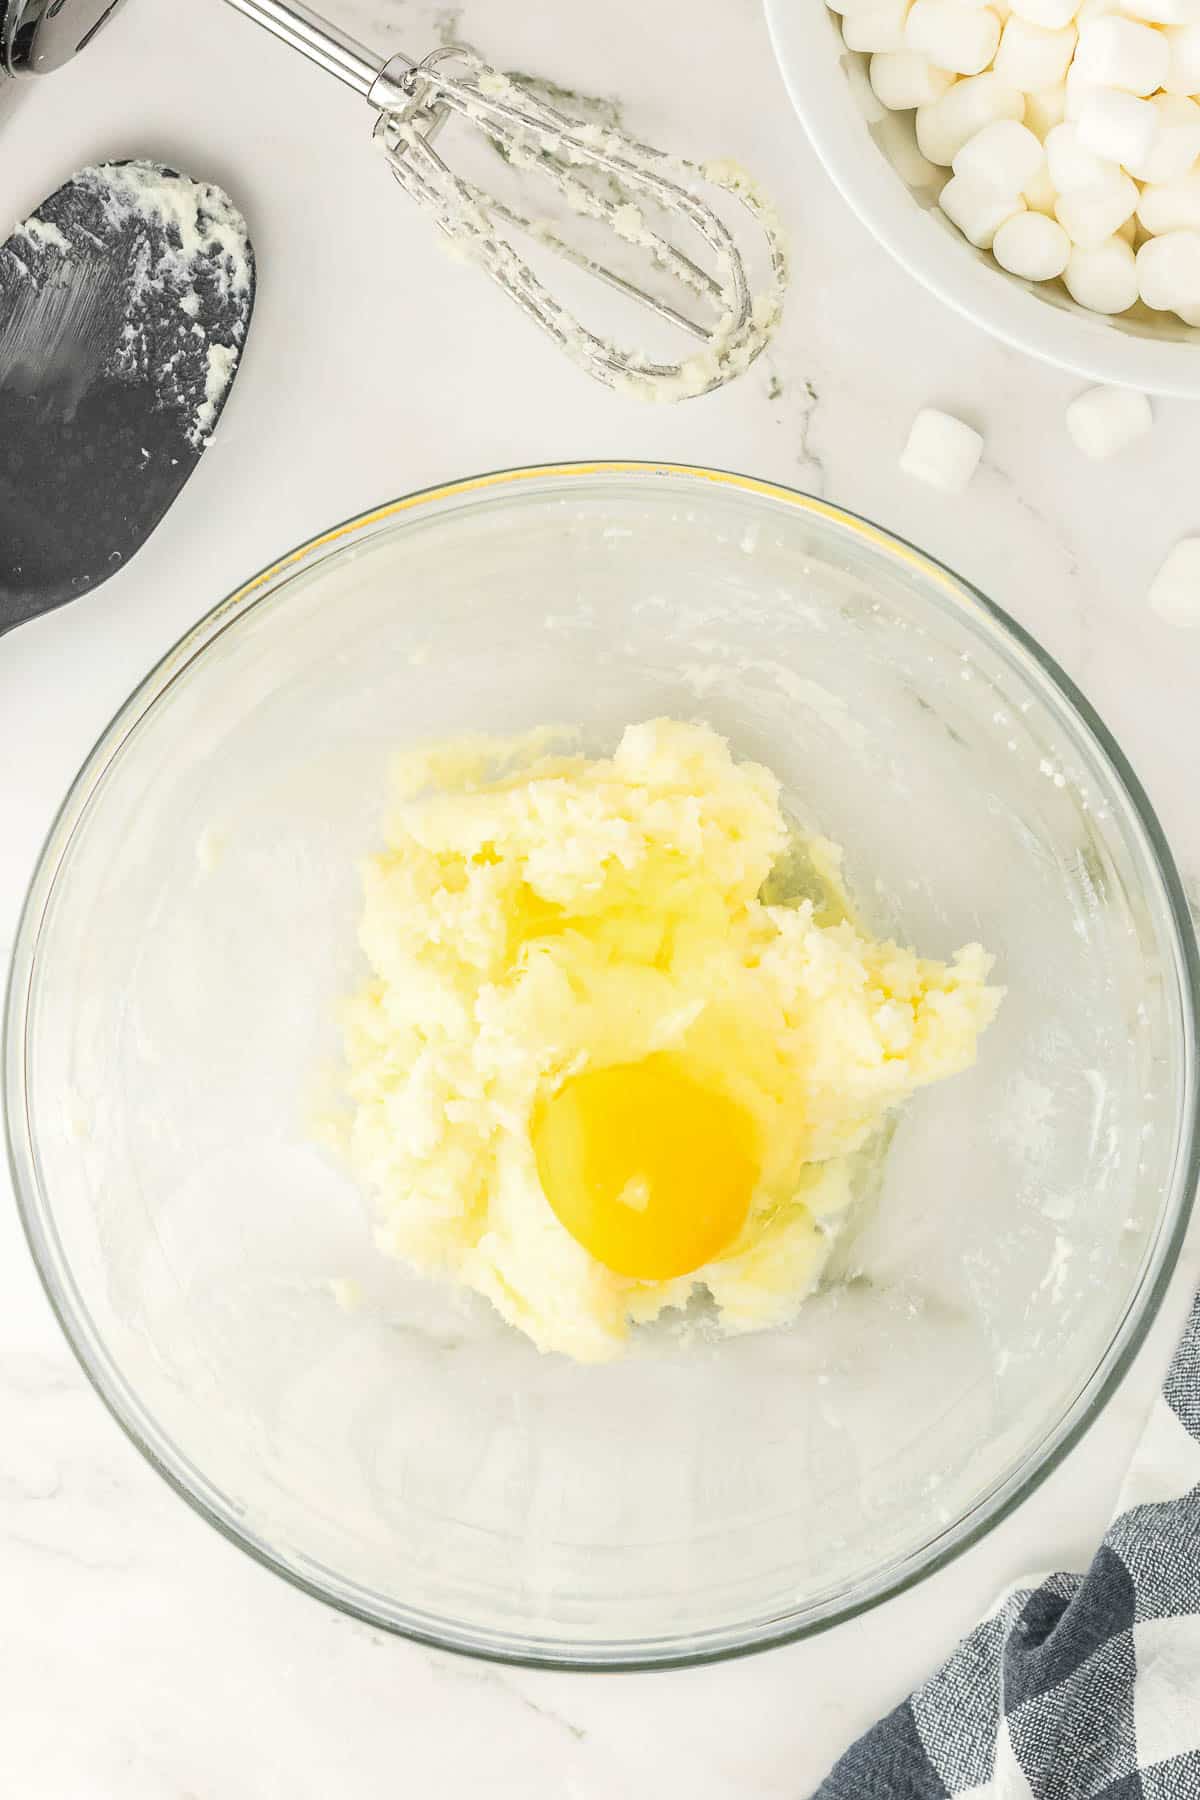 Egg added into glass bowl of butter and sugar mixture.